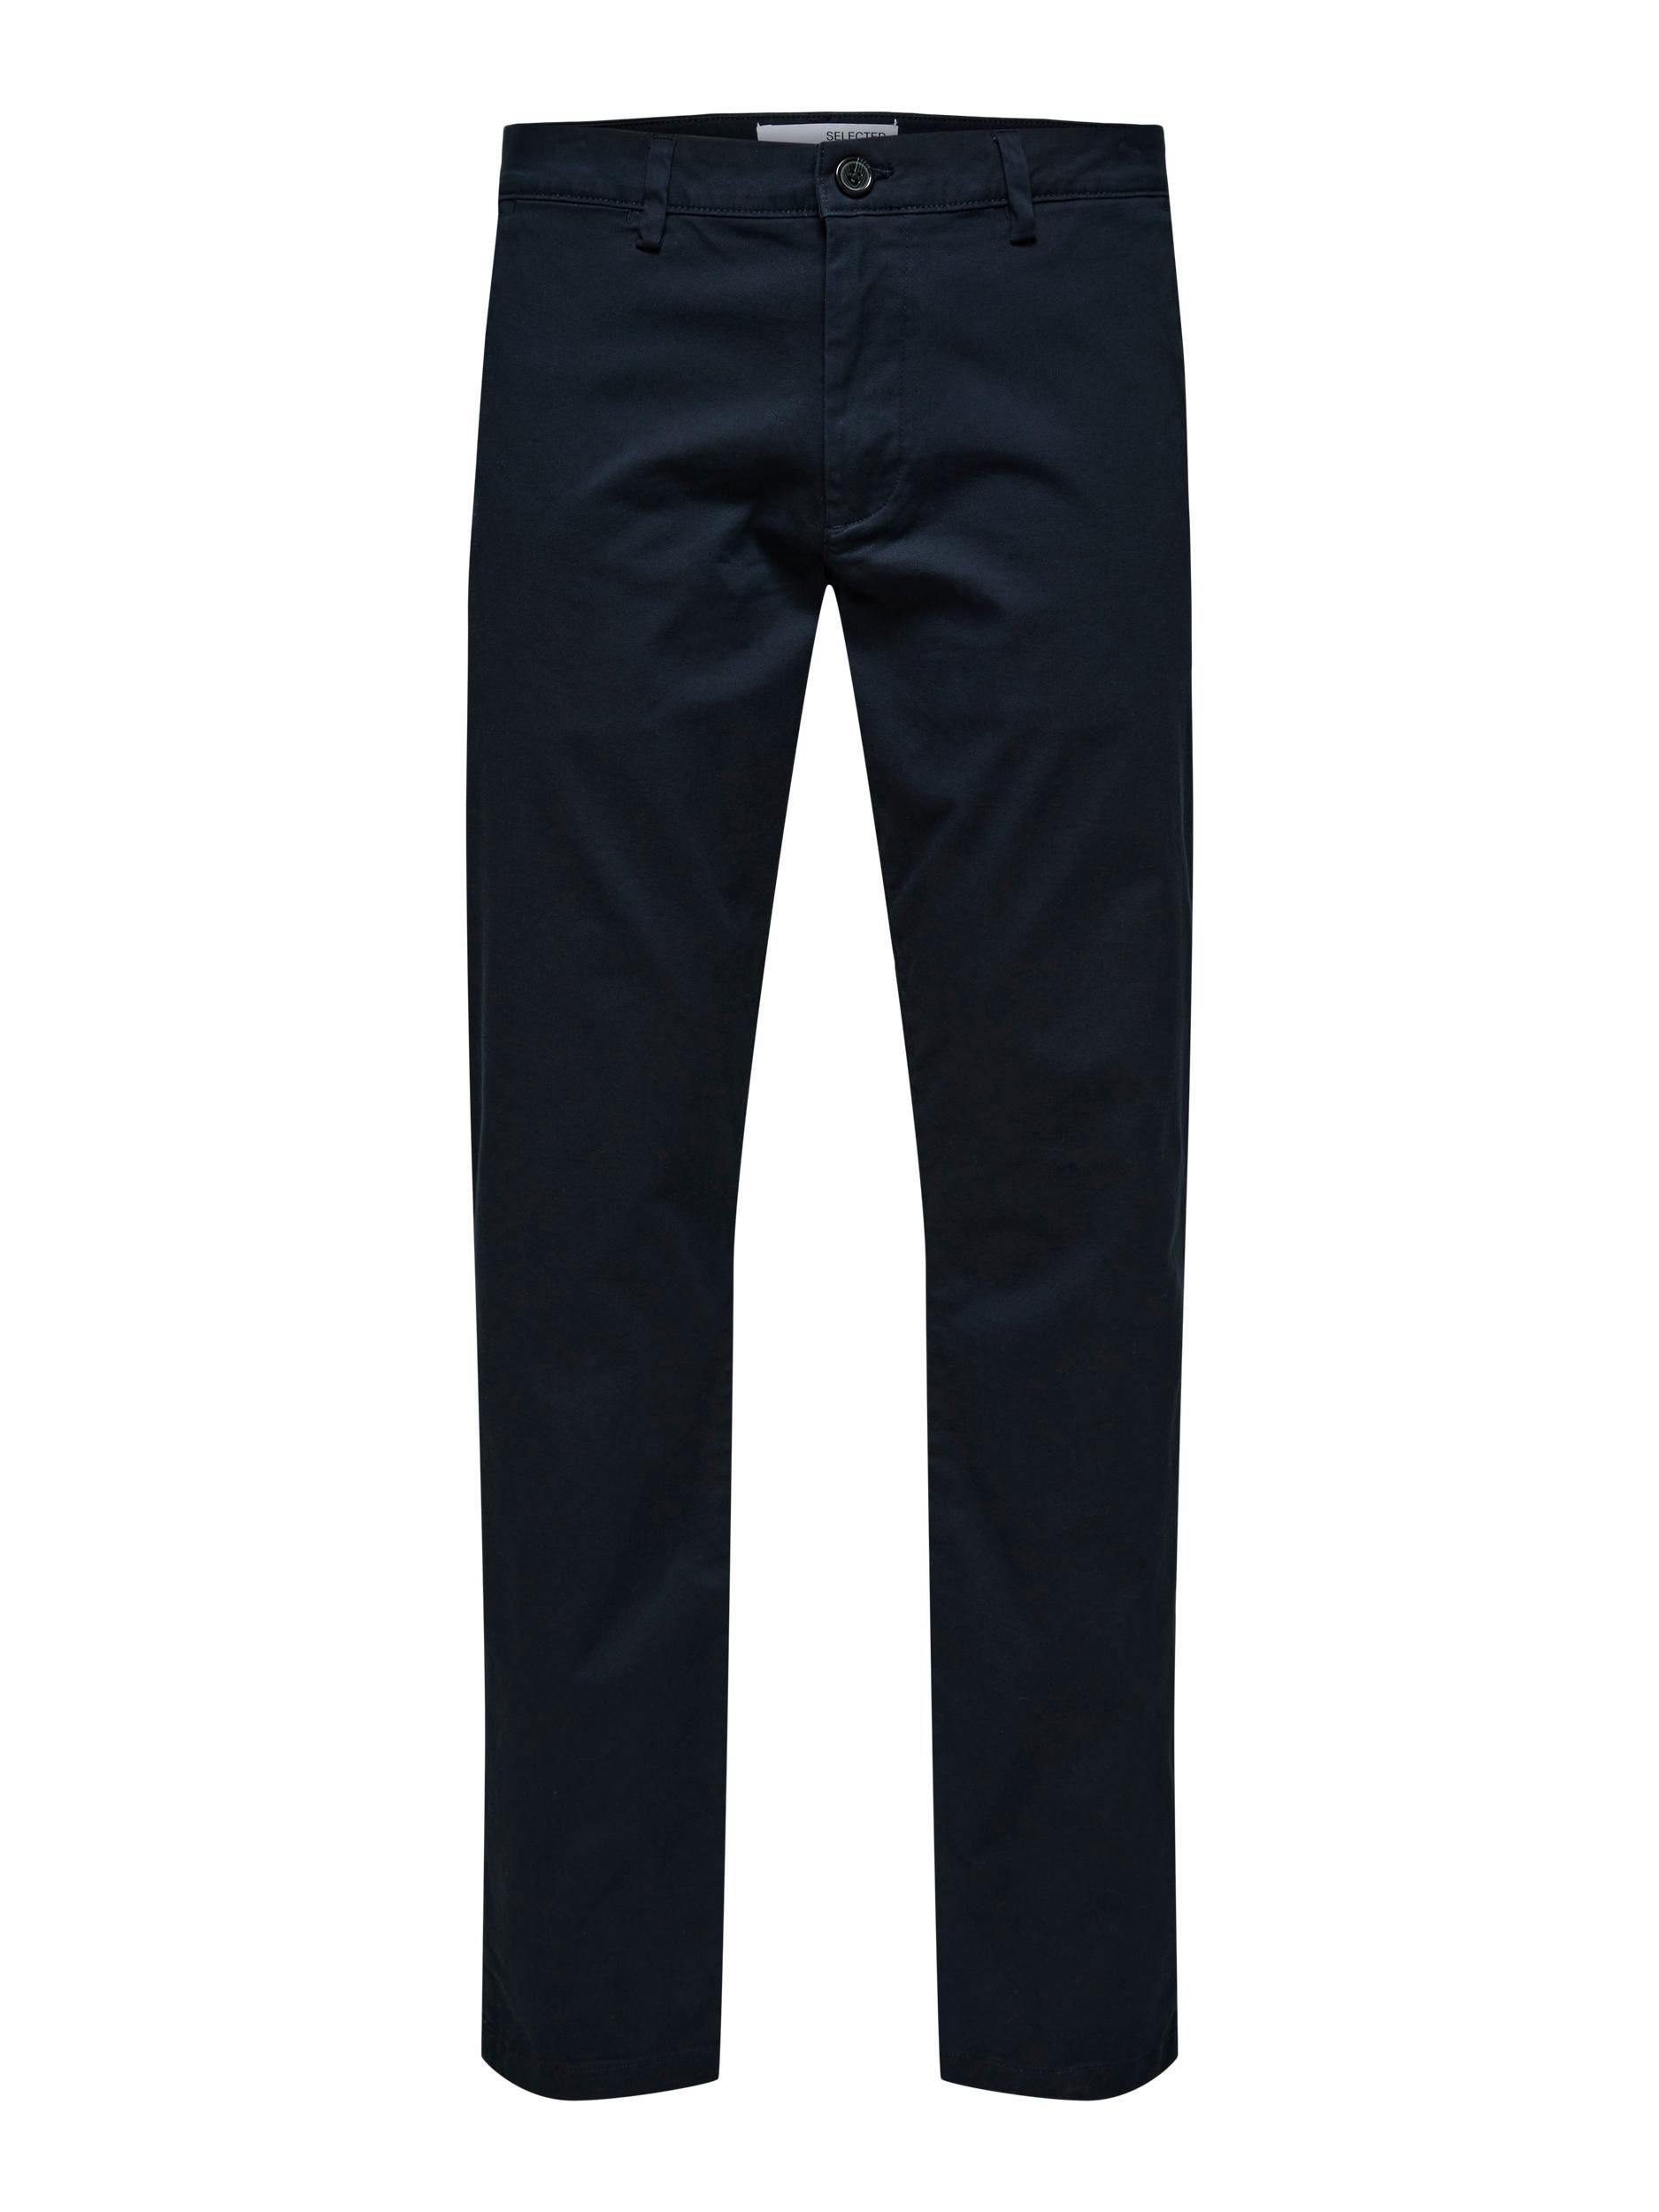 SELECTED HOMME Chinohose Strech dark sapphire | Chinohosen